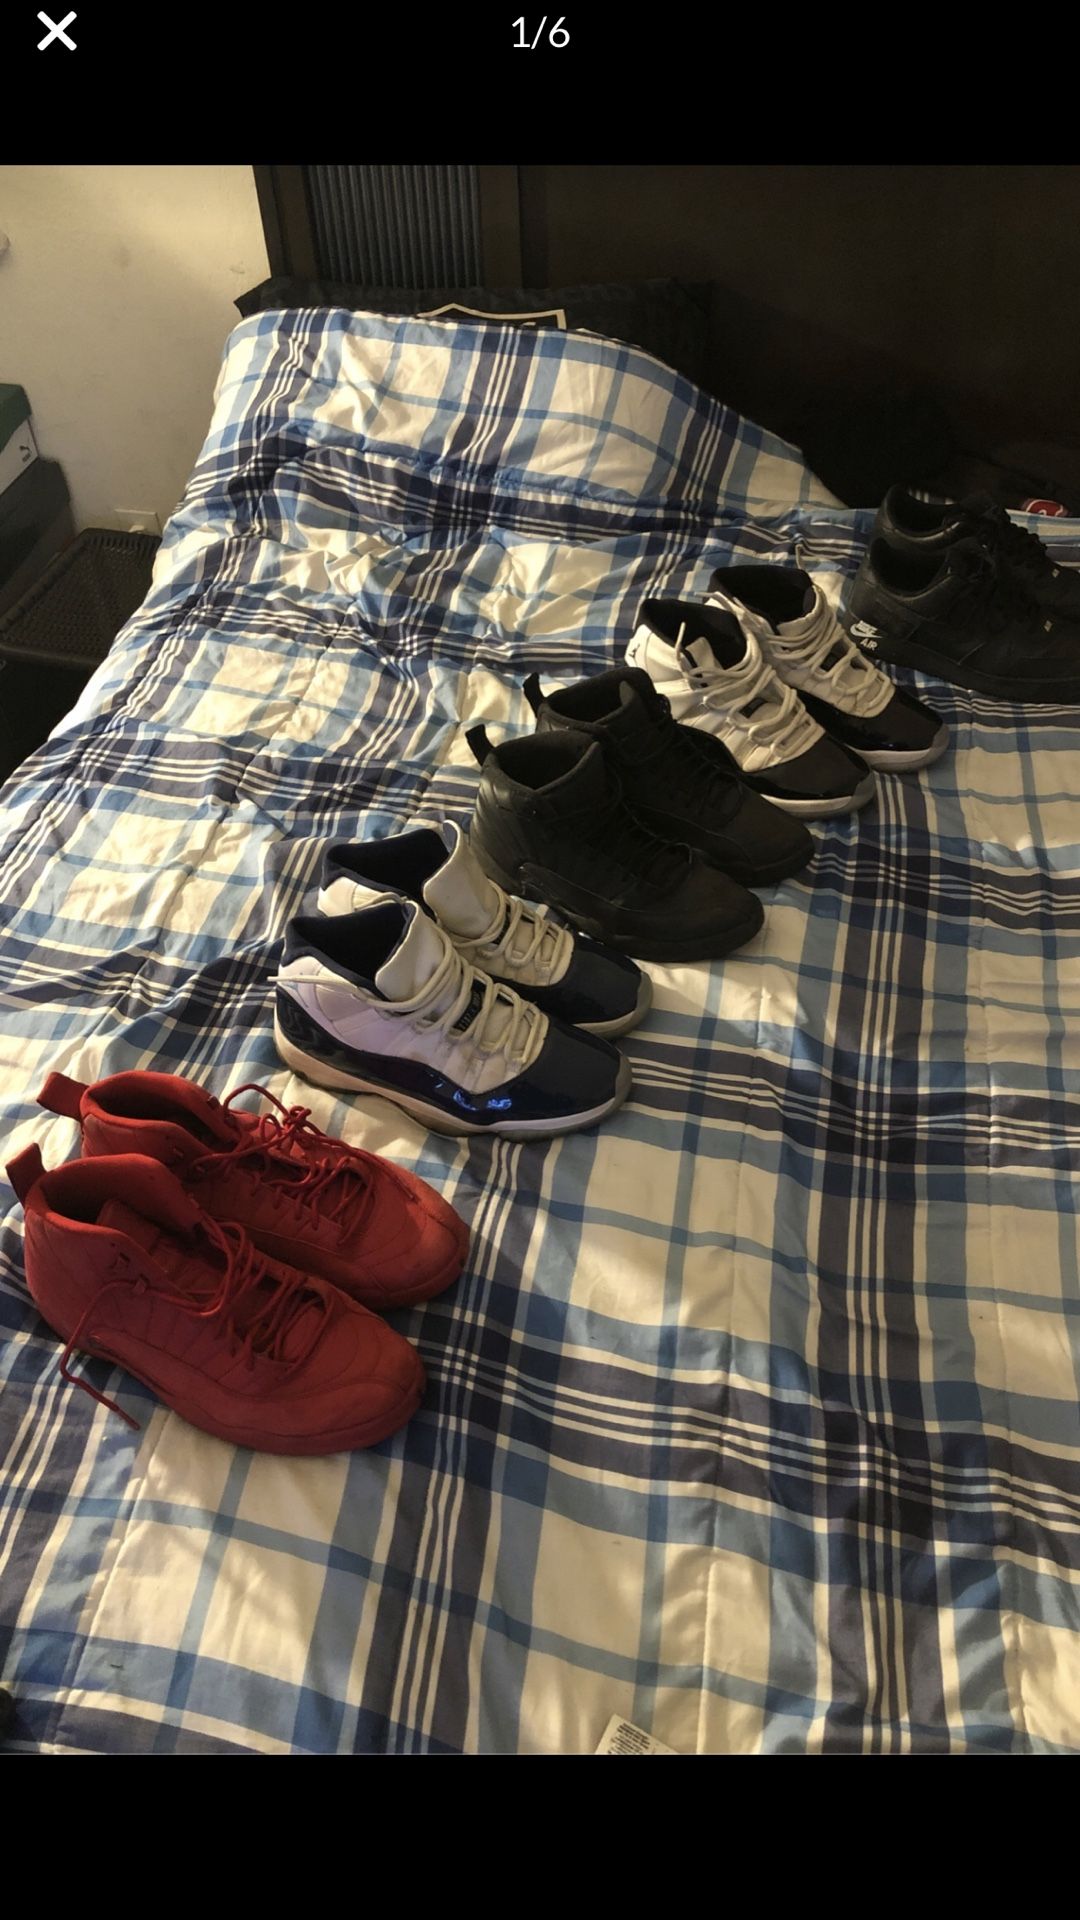 Jordan 11s , 12s and black force’s all size 13